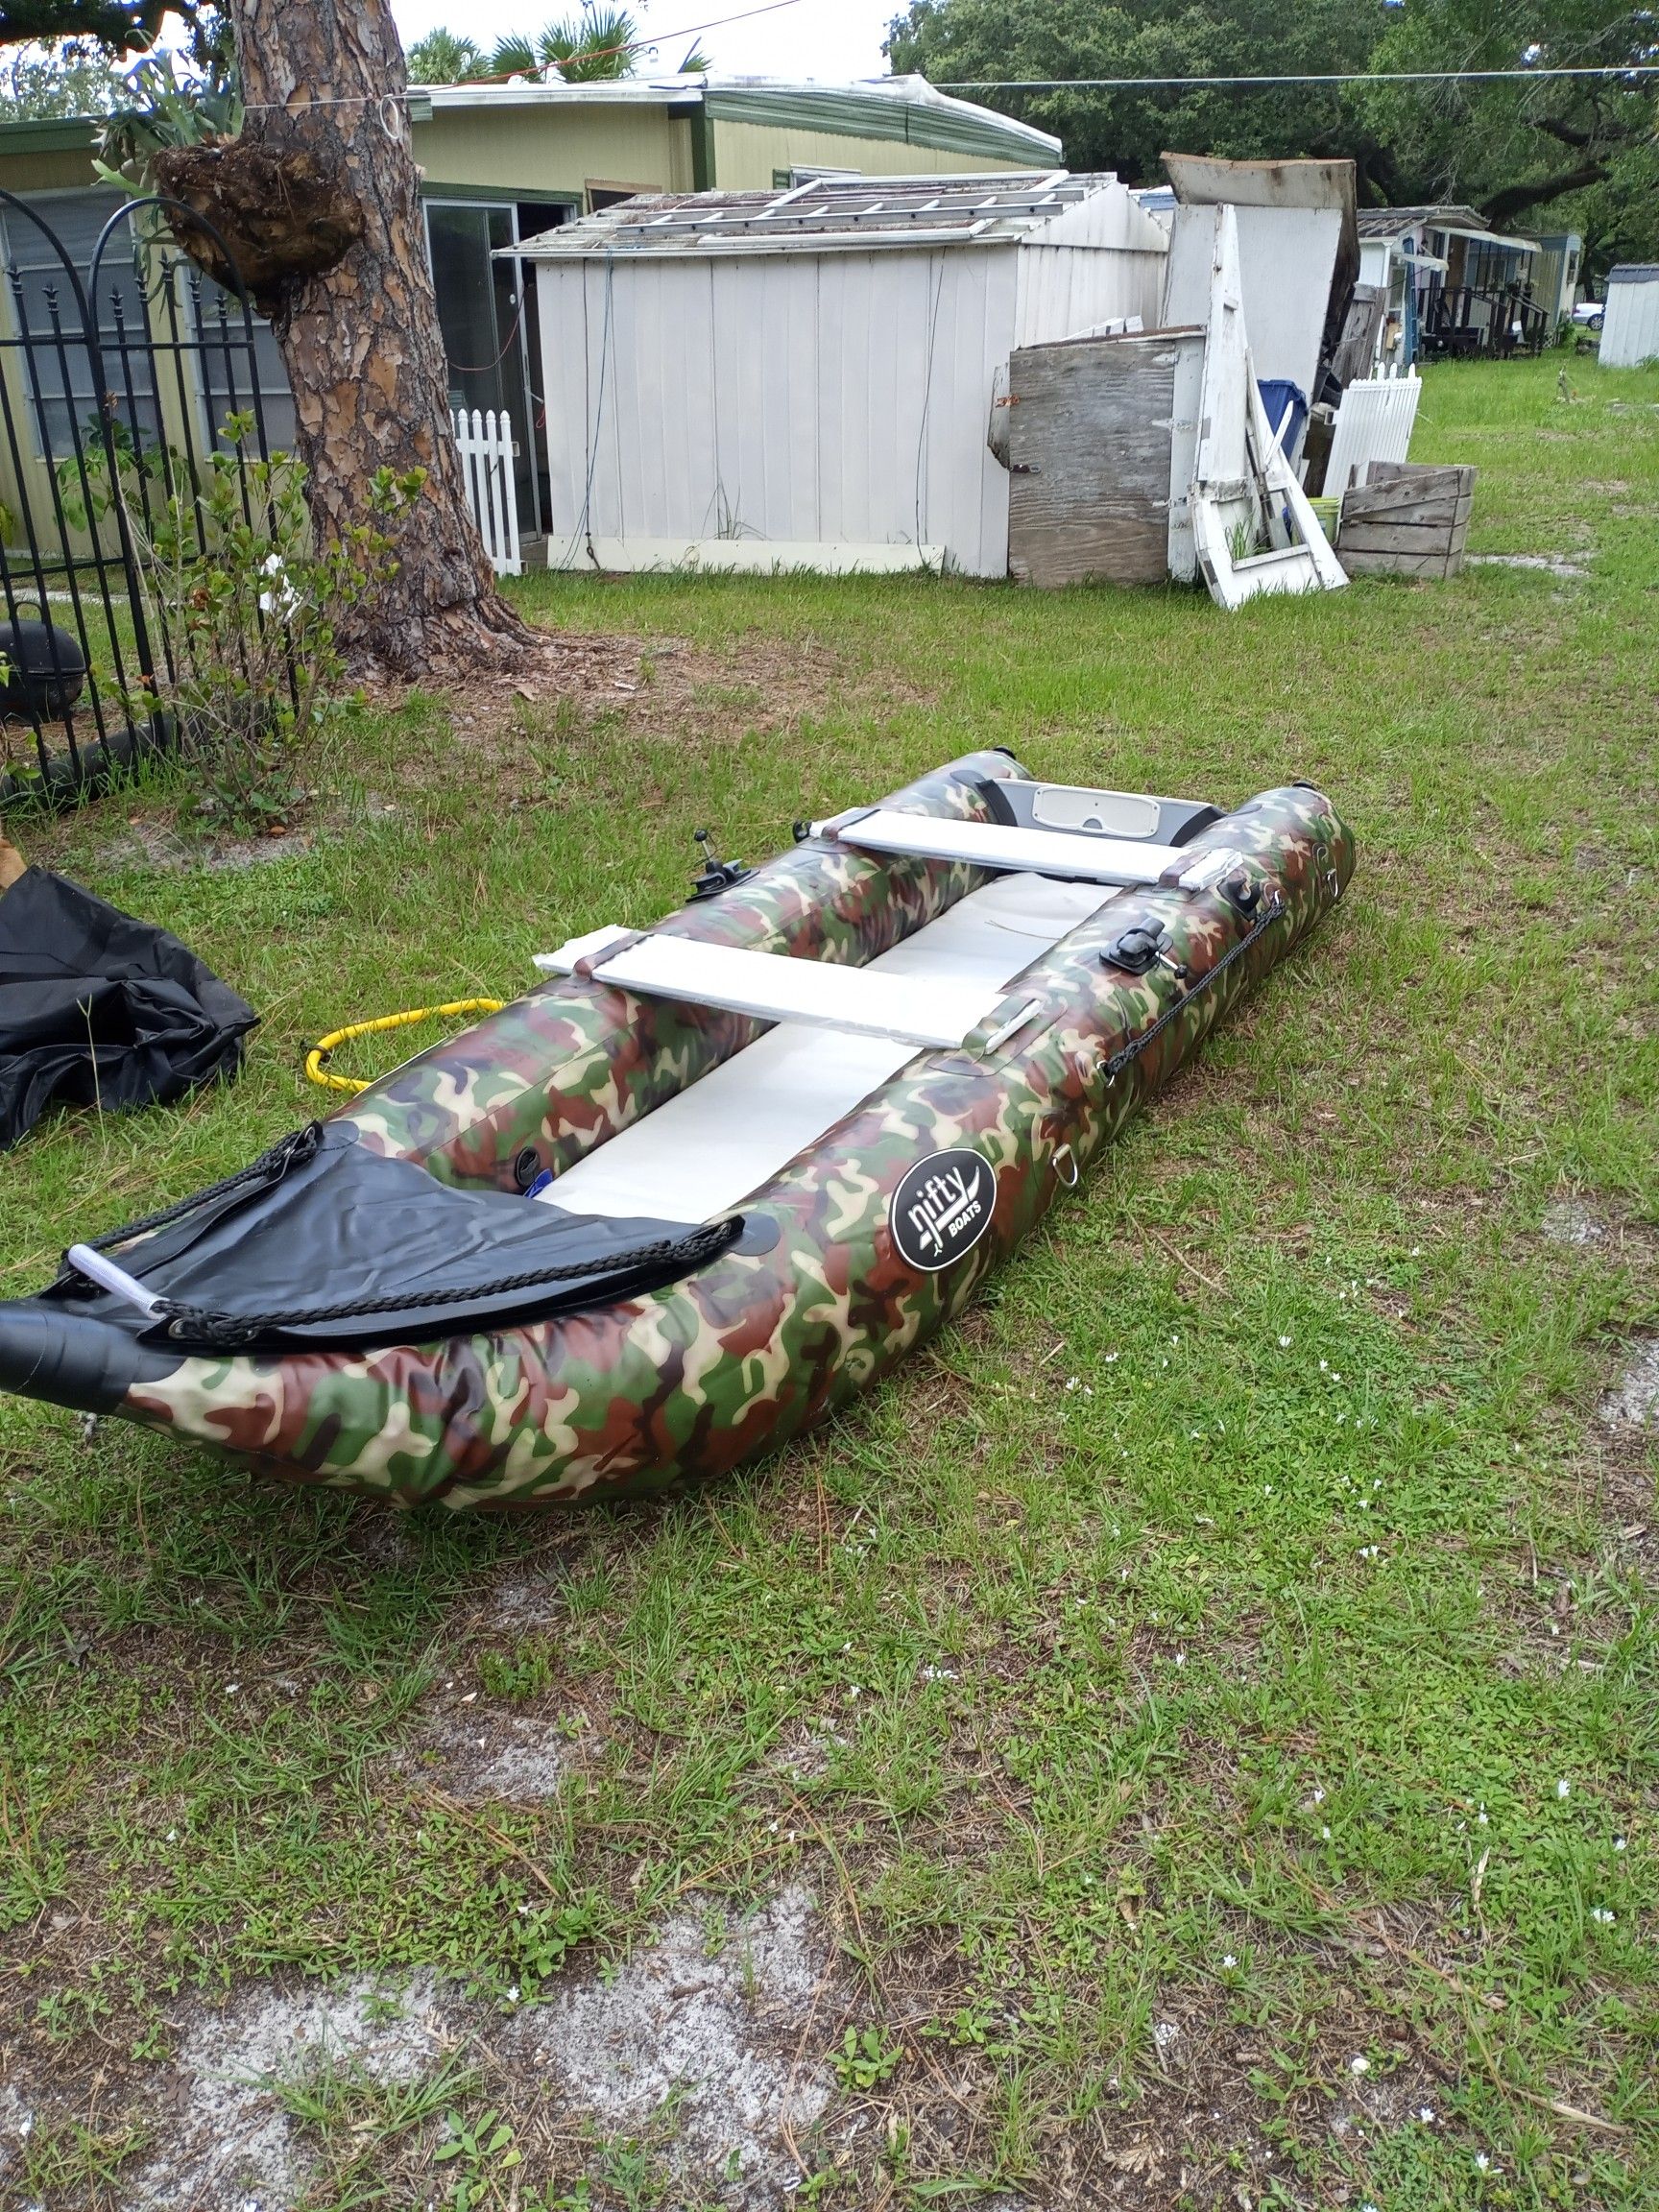 Nifty 12 foot inflatable dinghy